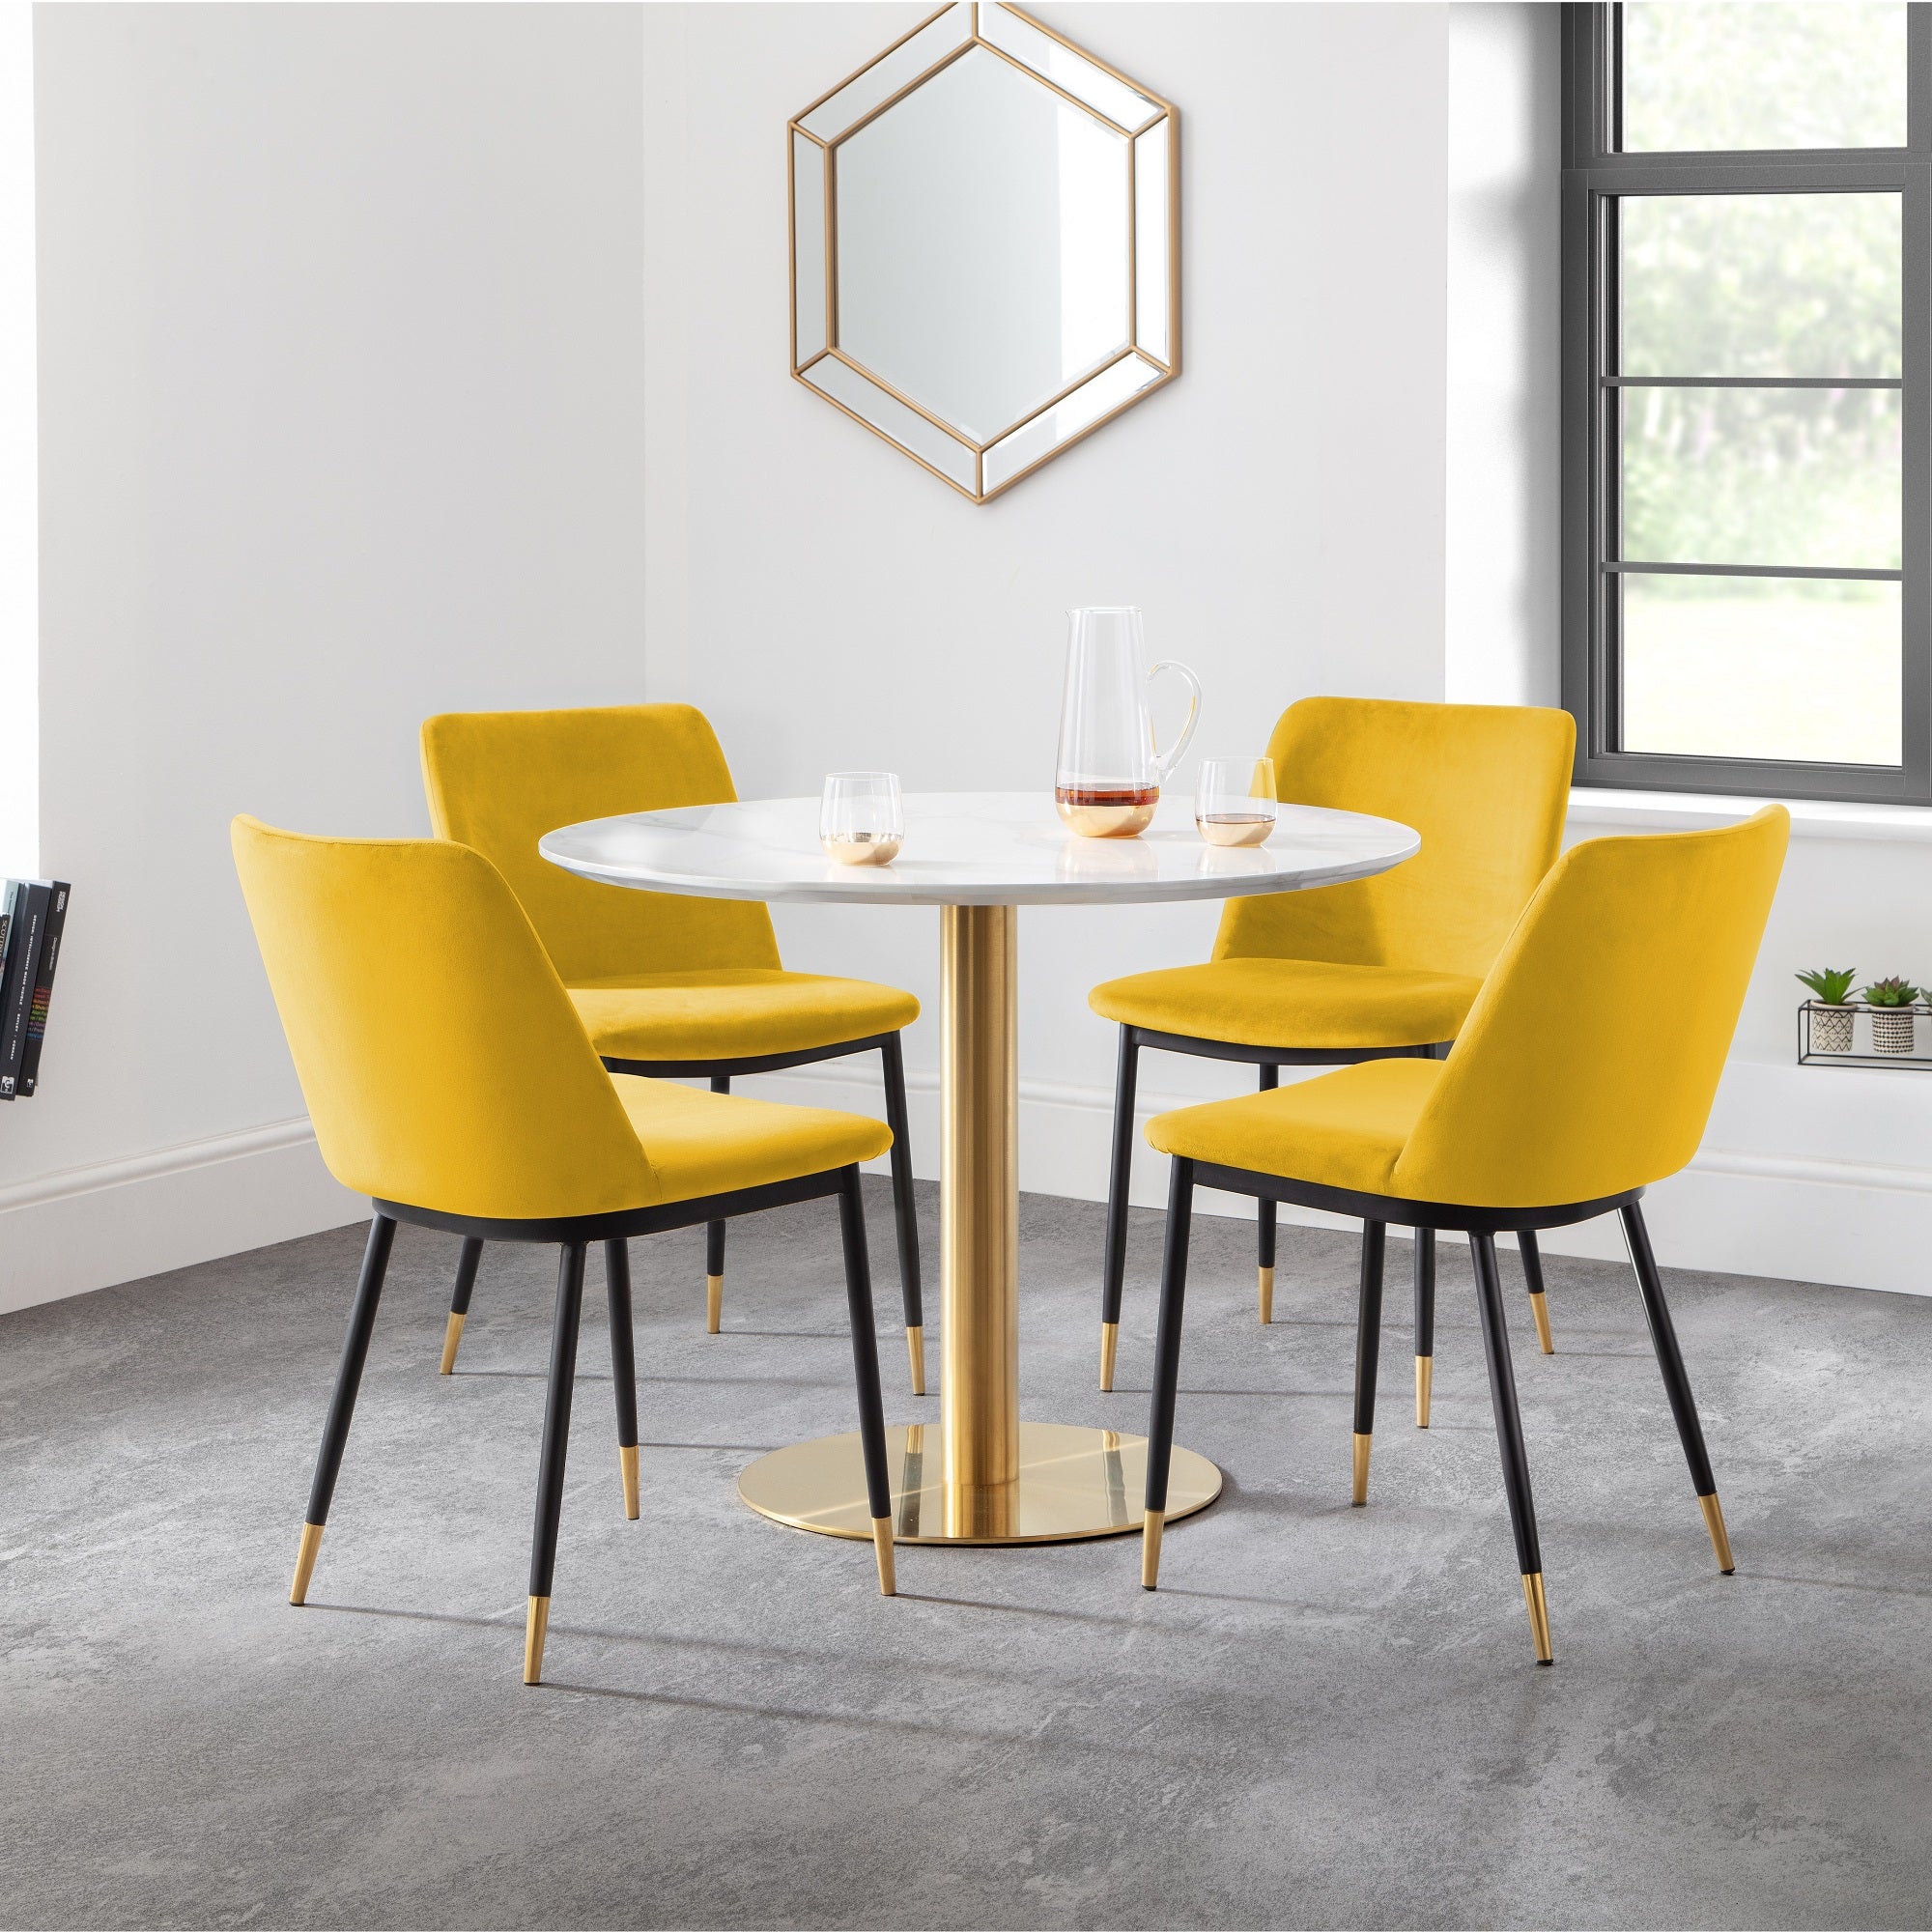 Palermo 4 Seater Round Pedestal Dining Table White Gold